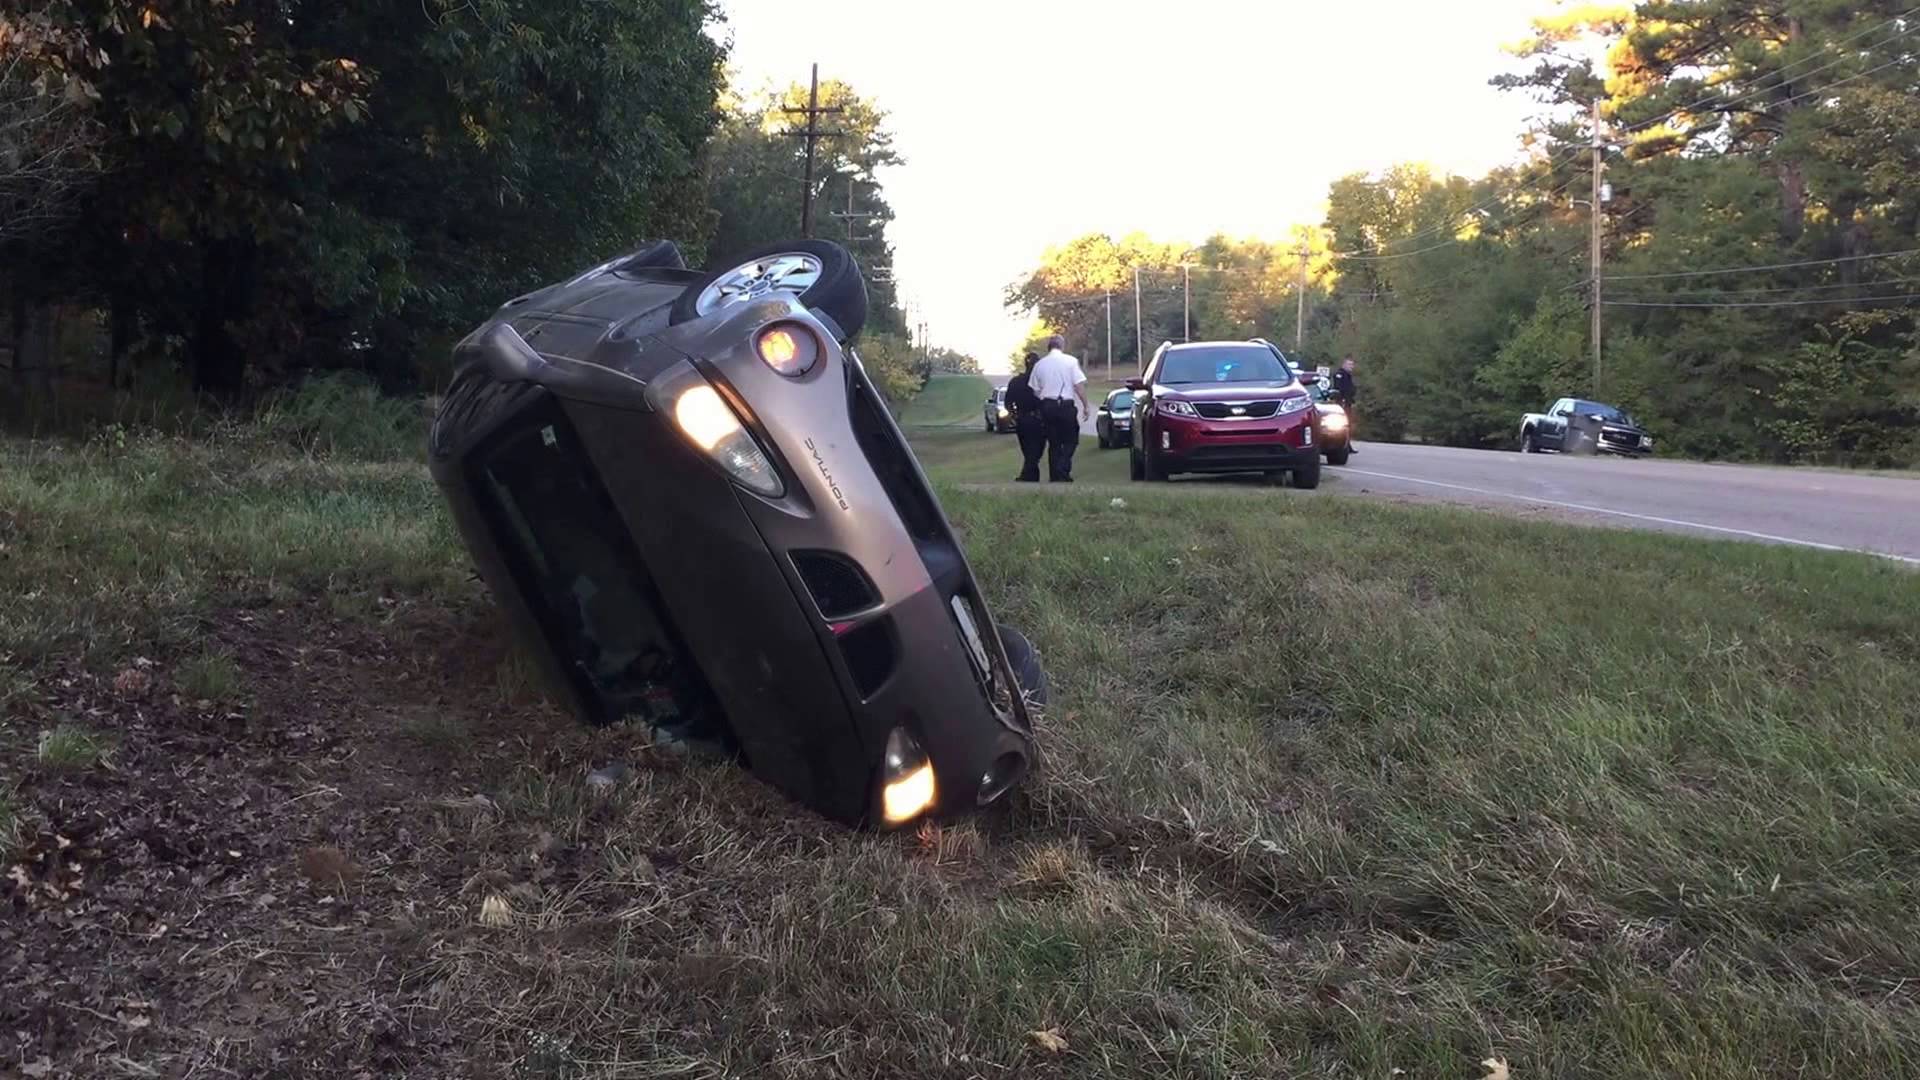 10 People Were Injured In A Rollover Accident